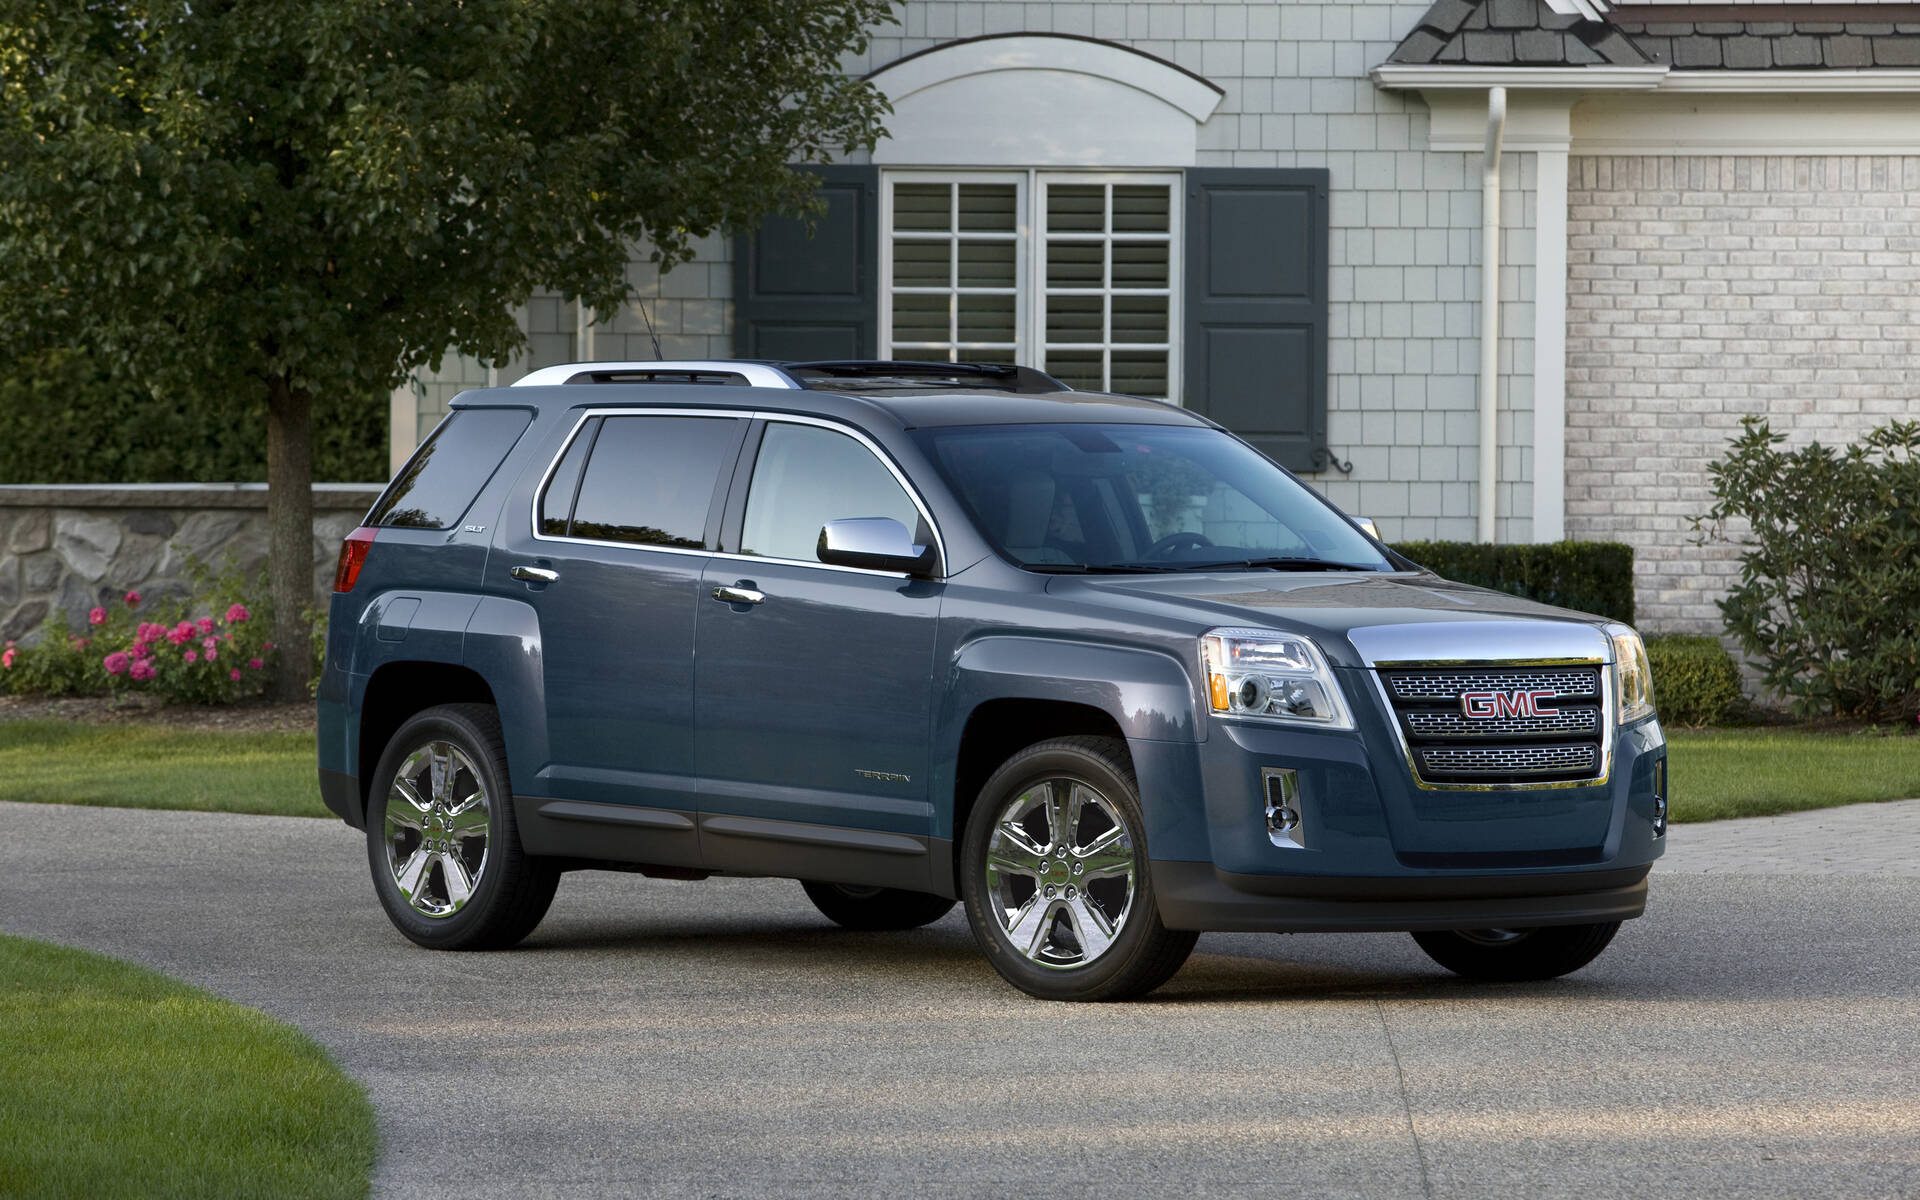 What You Need to Know Before Buying a 2010-2017 GMC Terrain - The Car Guide